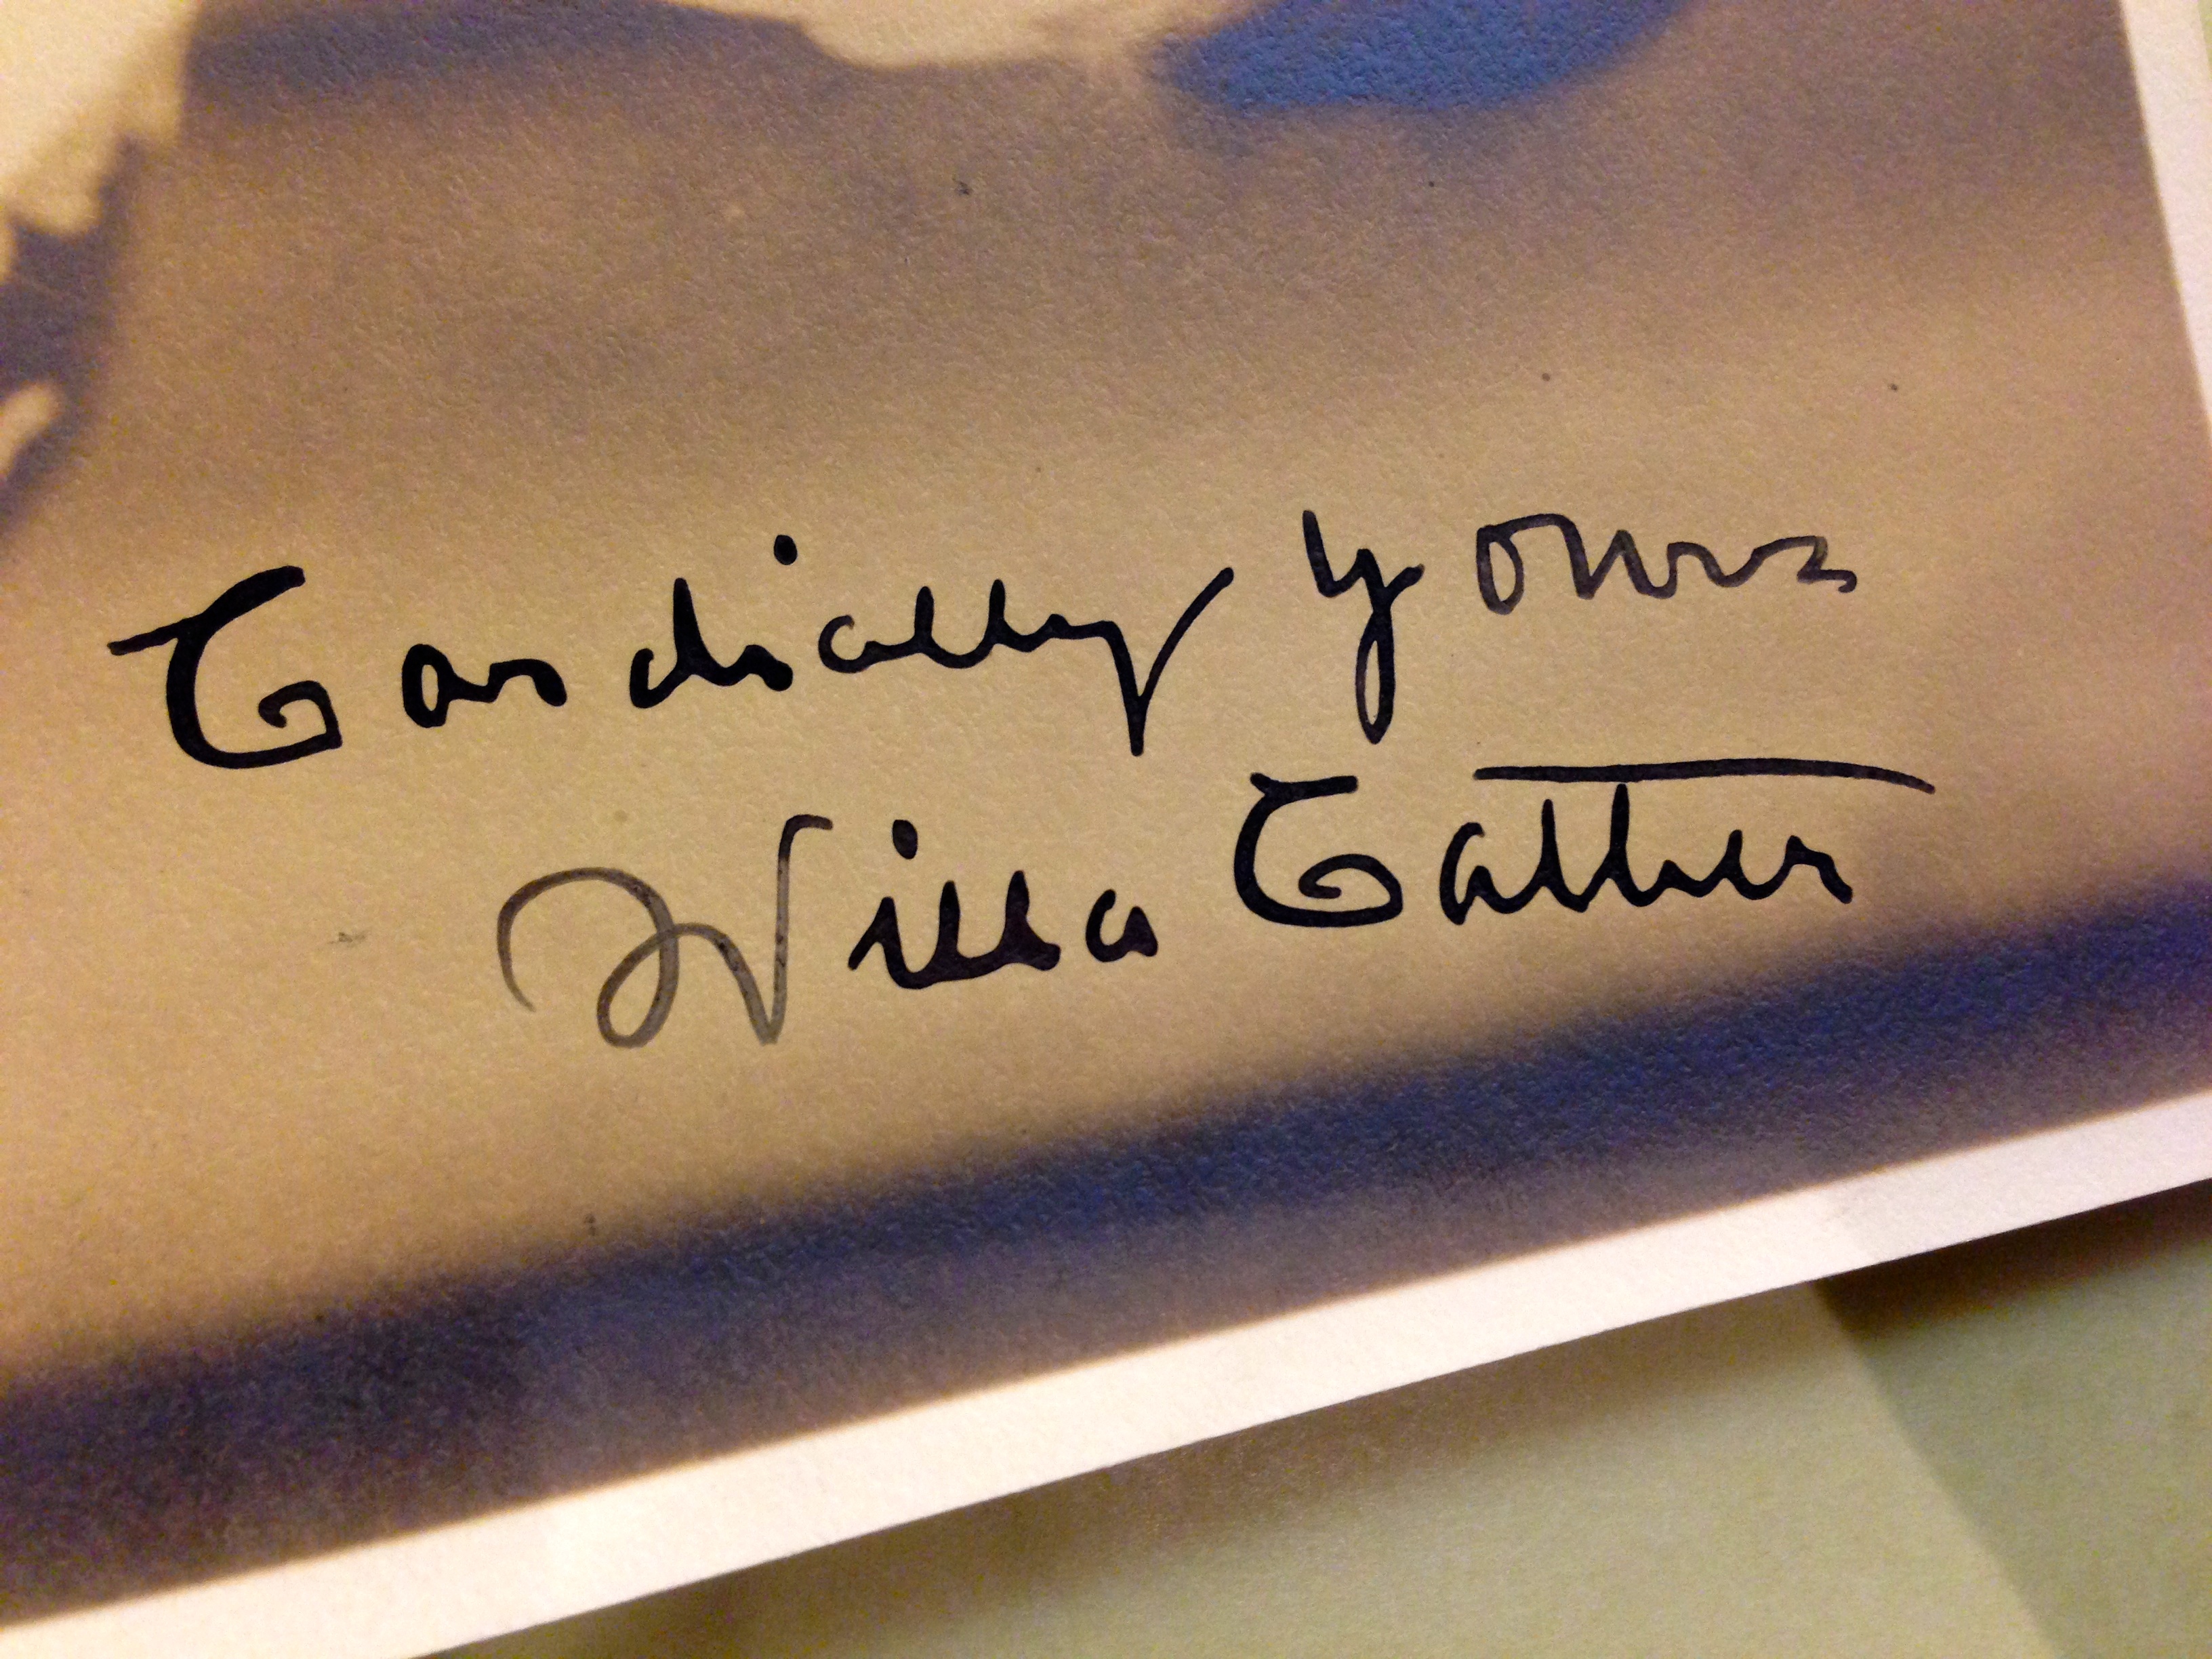 Detail of Willa Cather photograph, n.d. (Emily Caldwell)